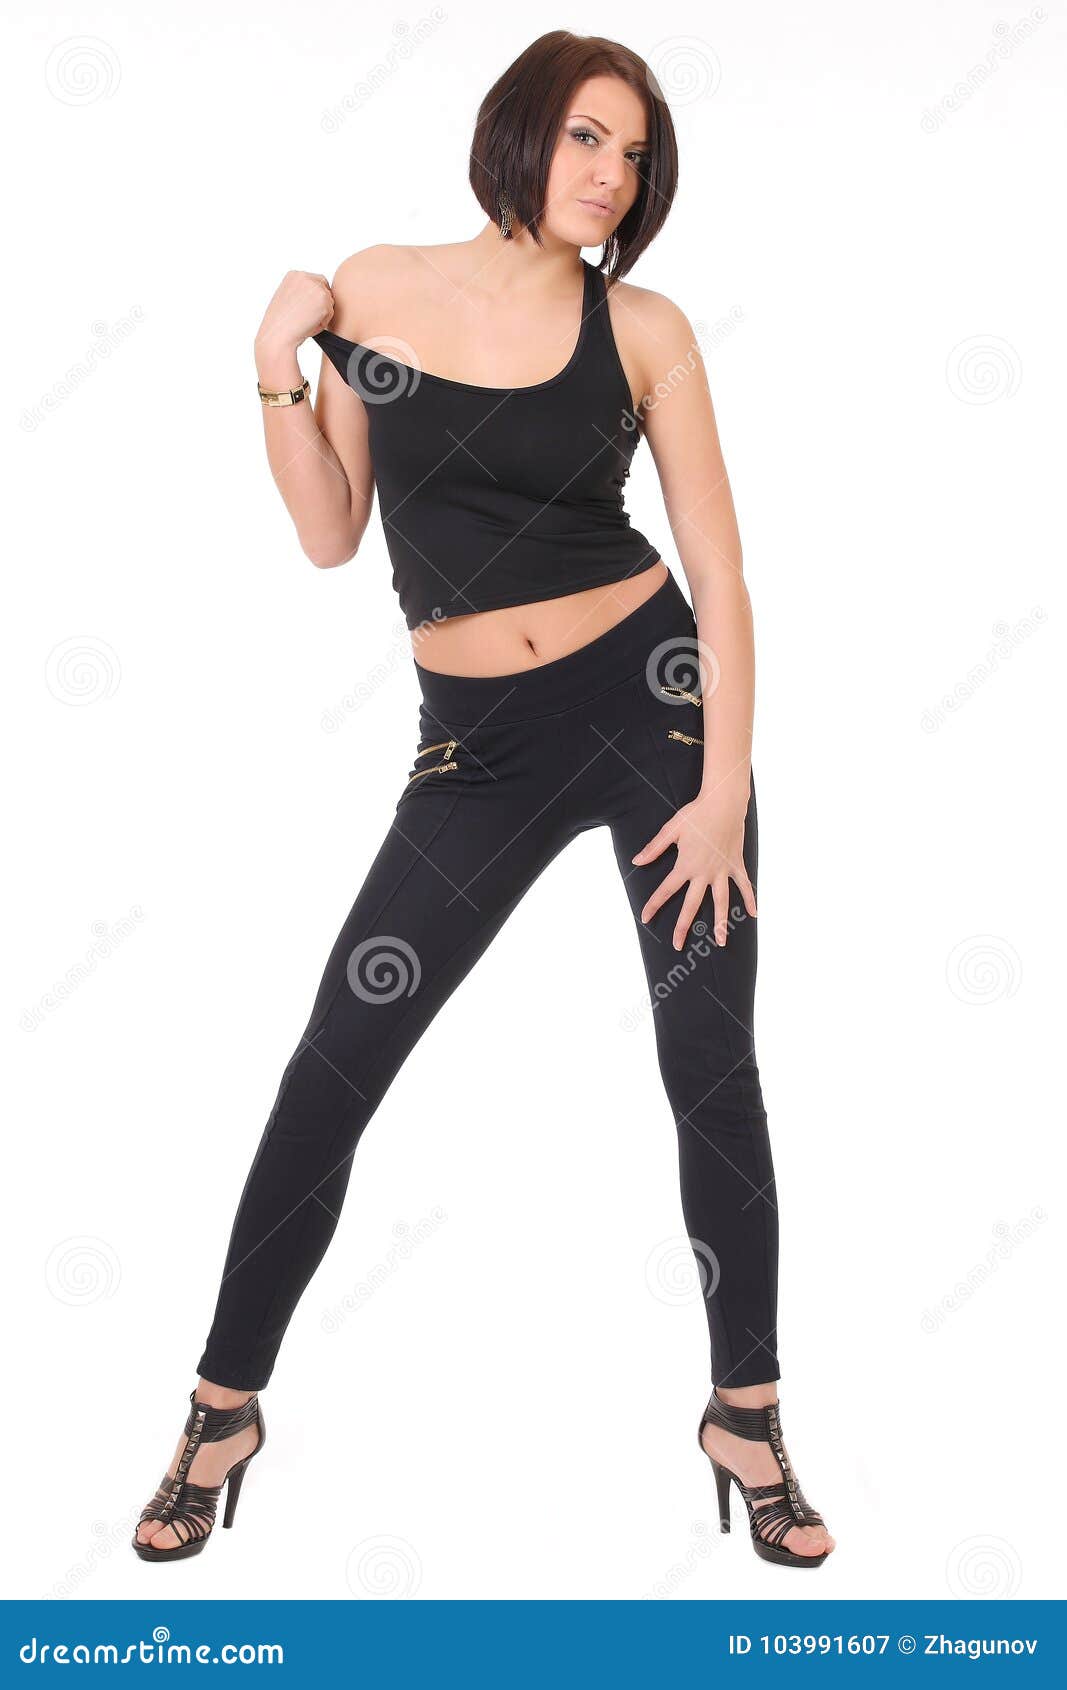 Beautiful Woman in a Black Tight Dress Stock Image - Image of back ...